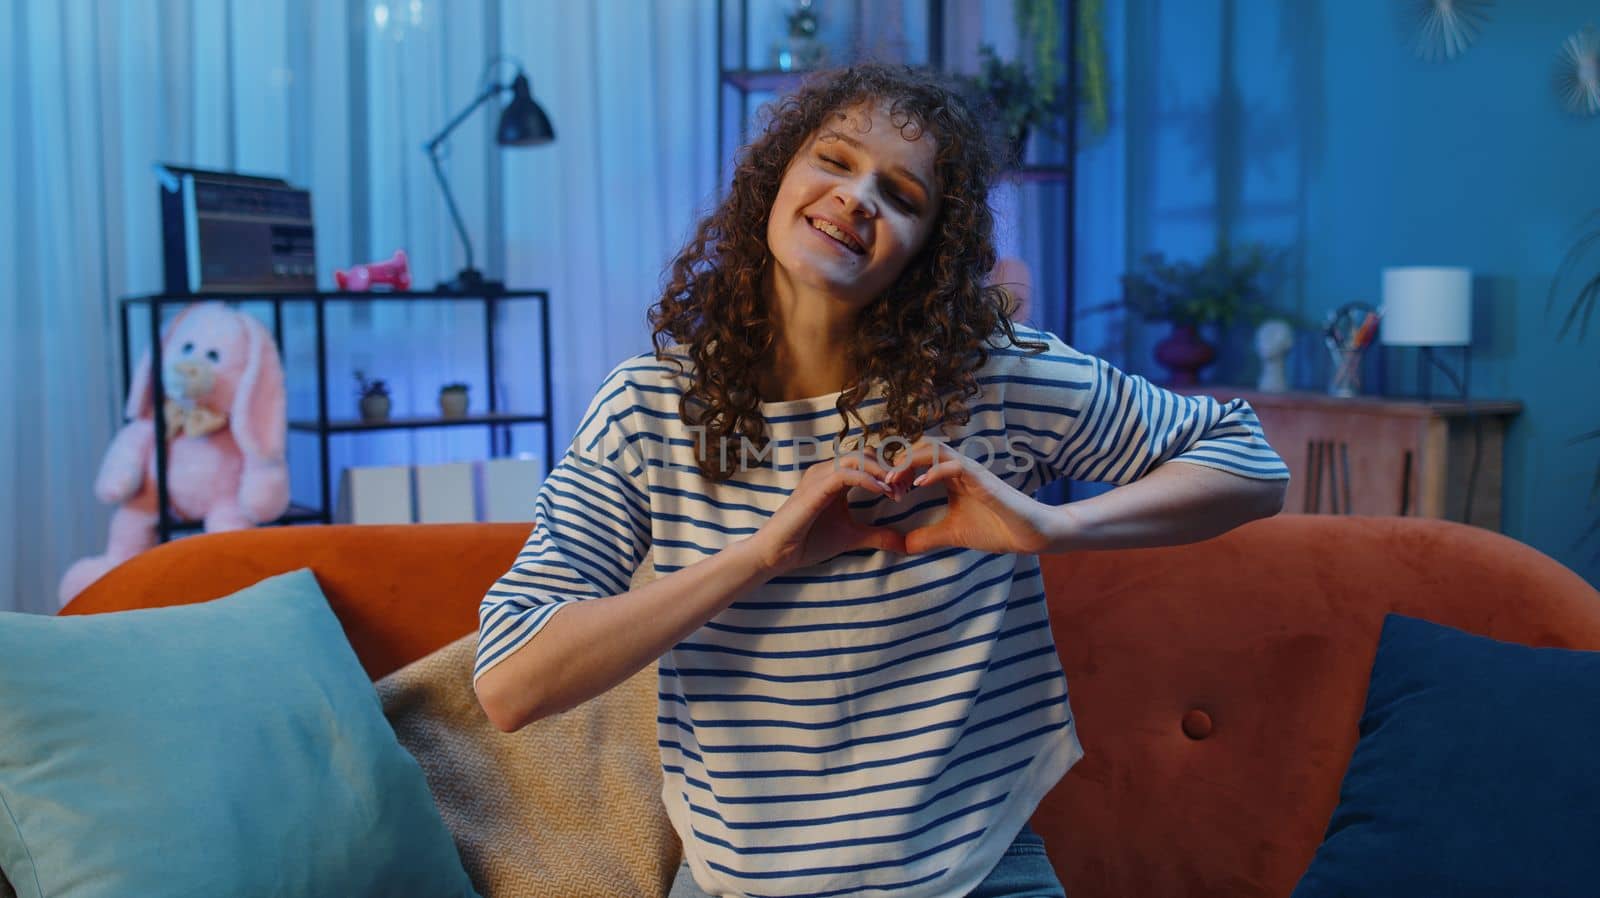 Happy young woman girl makes symbol of love showing heart sign to camera express romantic feelings by efuror